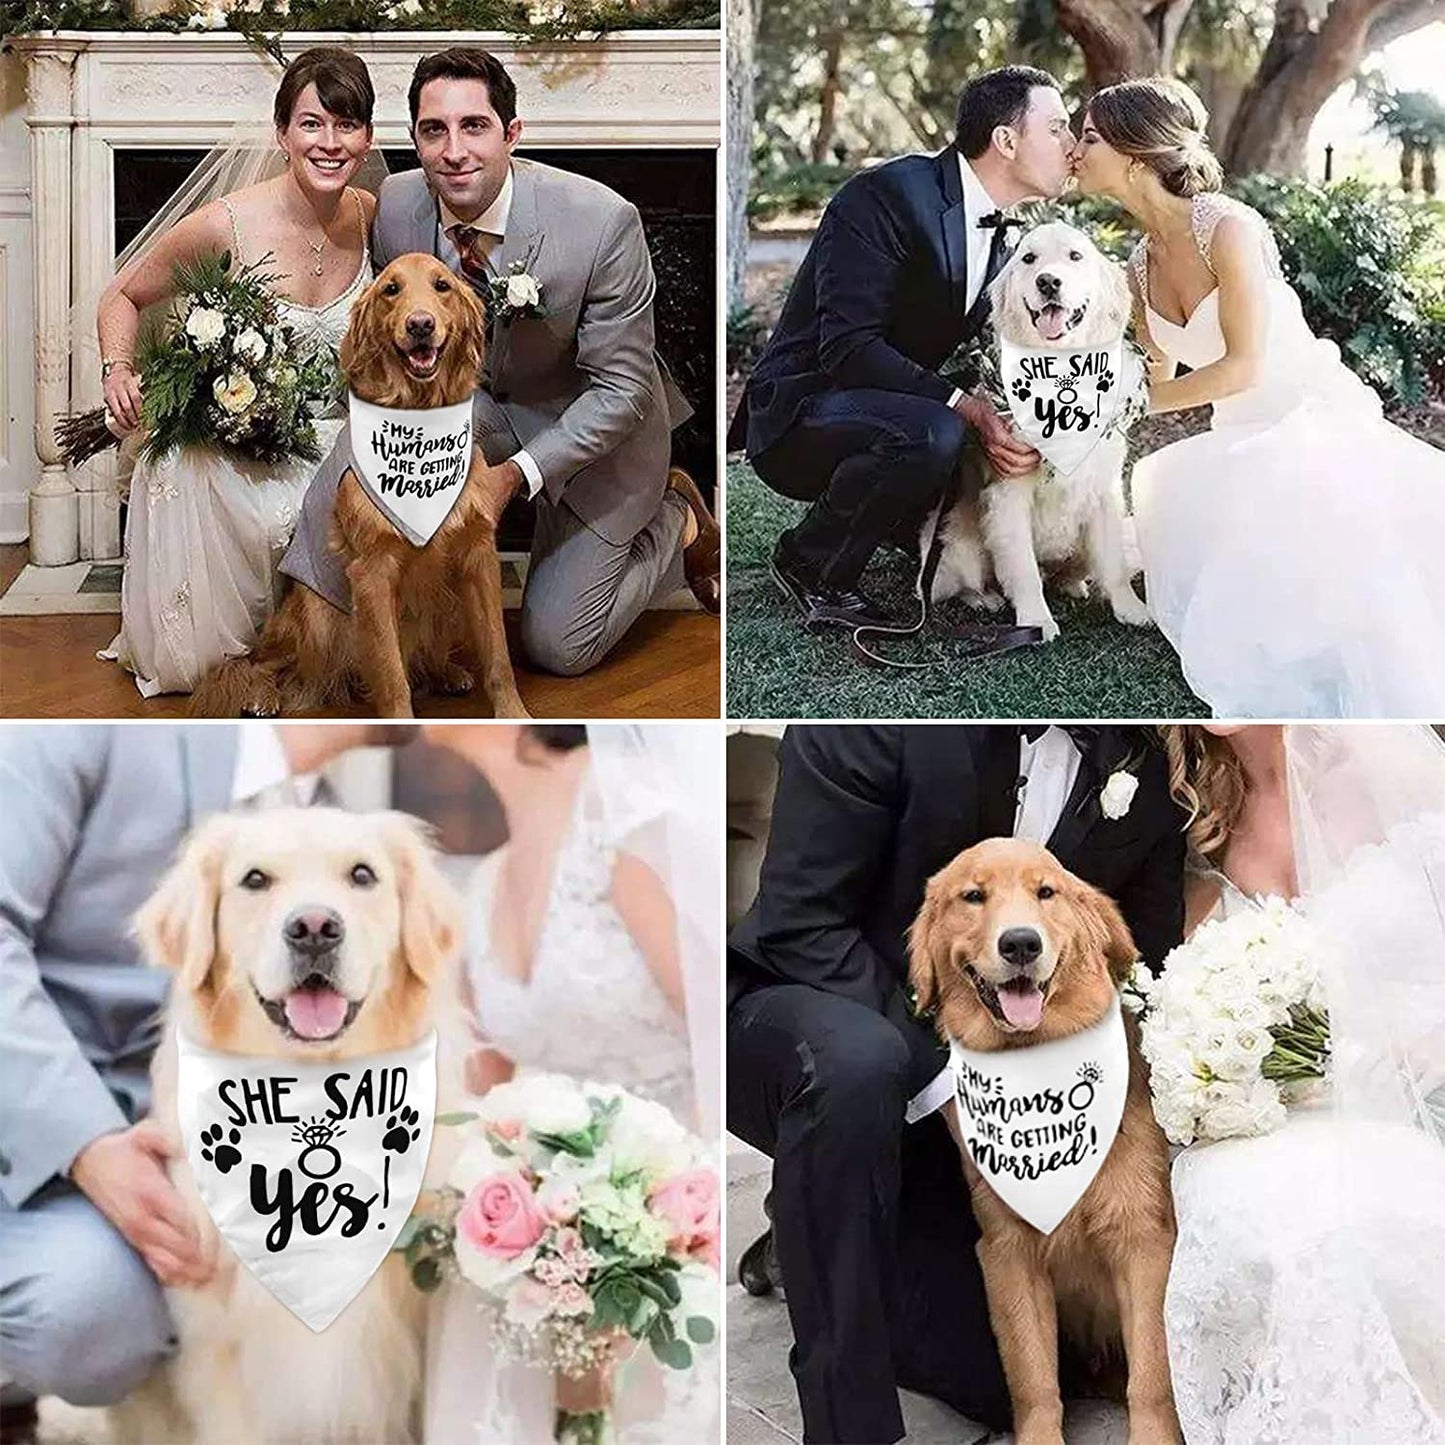 2PCS White My Humans Are Getting Married She Said Yes Dog Wedding Engagement Bandana, LMSHOWOWO Dog Bandana Wedding Engagement Announcement Gifts Pet Scarf Accessories for Dog Lovers, Bridal Shower Animals & Pet Supplies > Pet Supplies > Dog Supplies > Dog Apparel LMSHOWOWO   